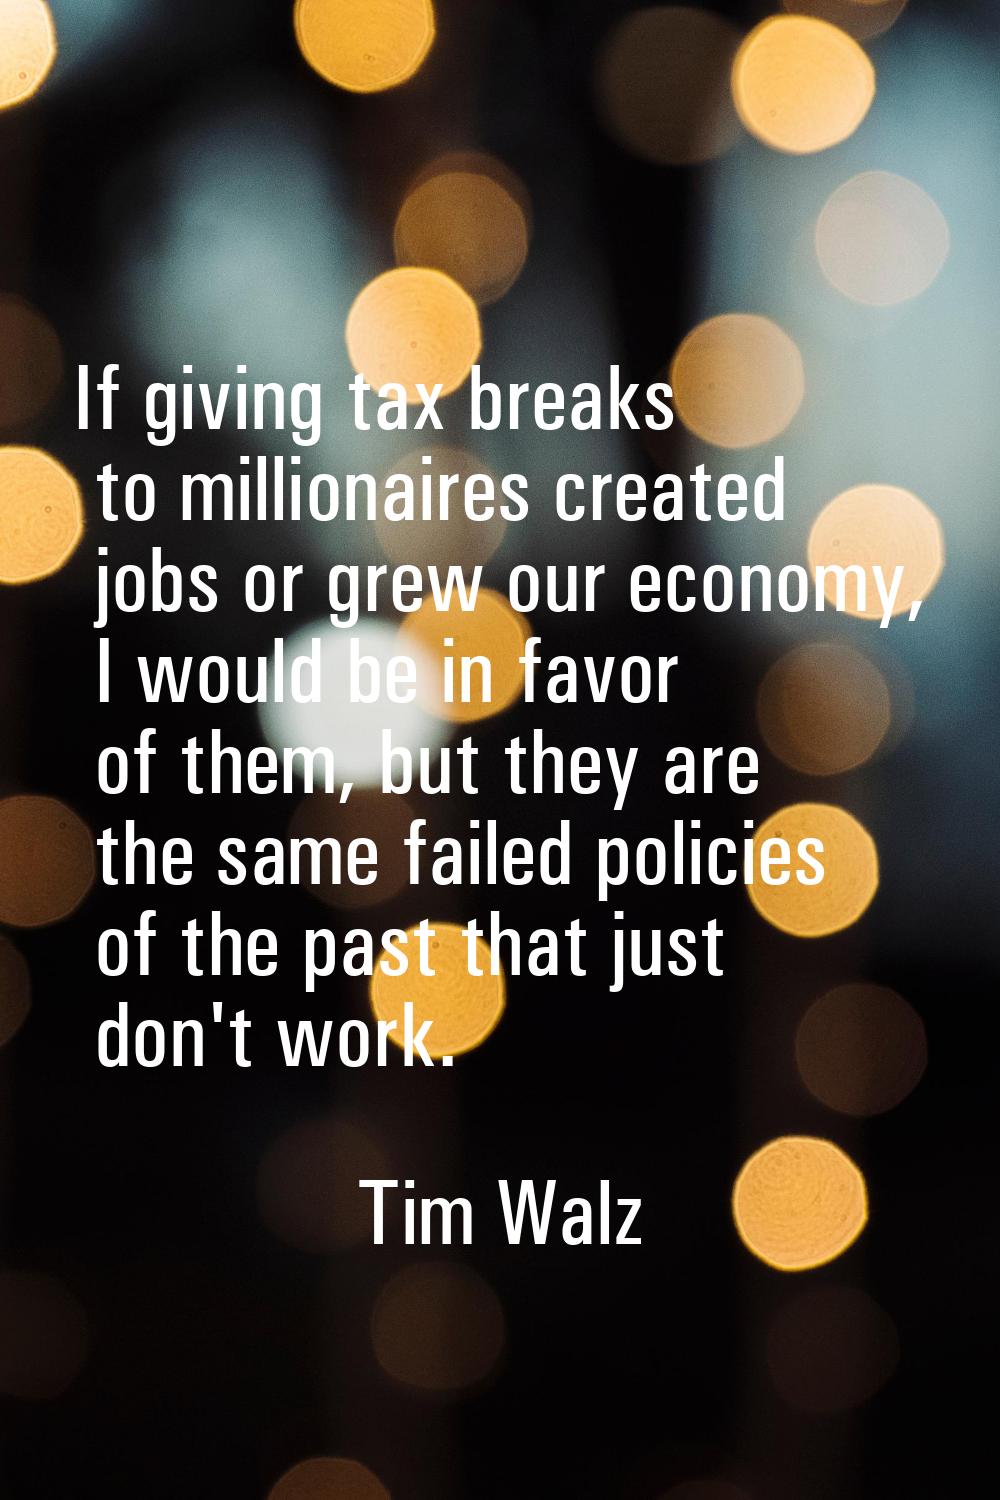 If giving tax breaks to millionaires created jobs or grew our economy, I would be in favor of them,